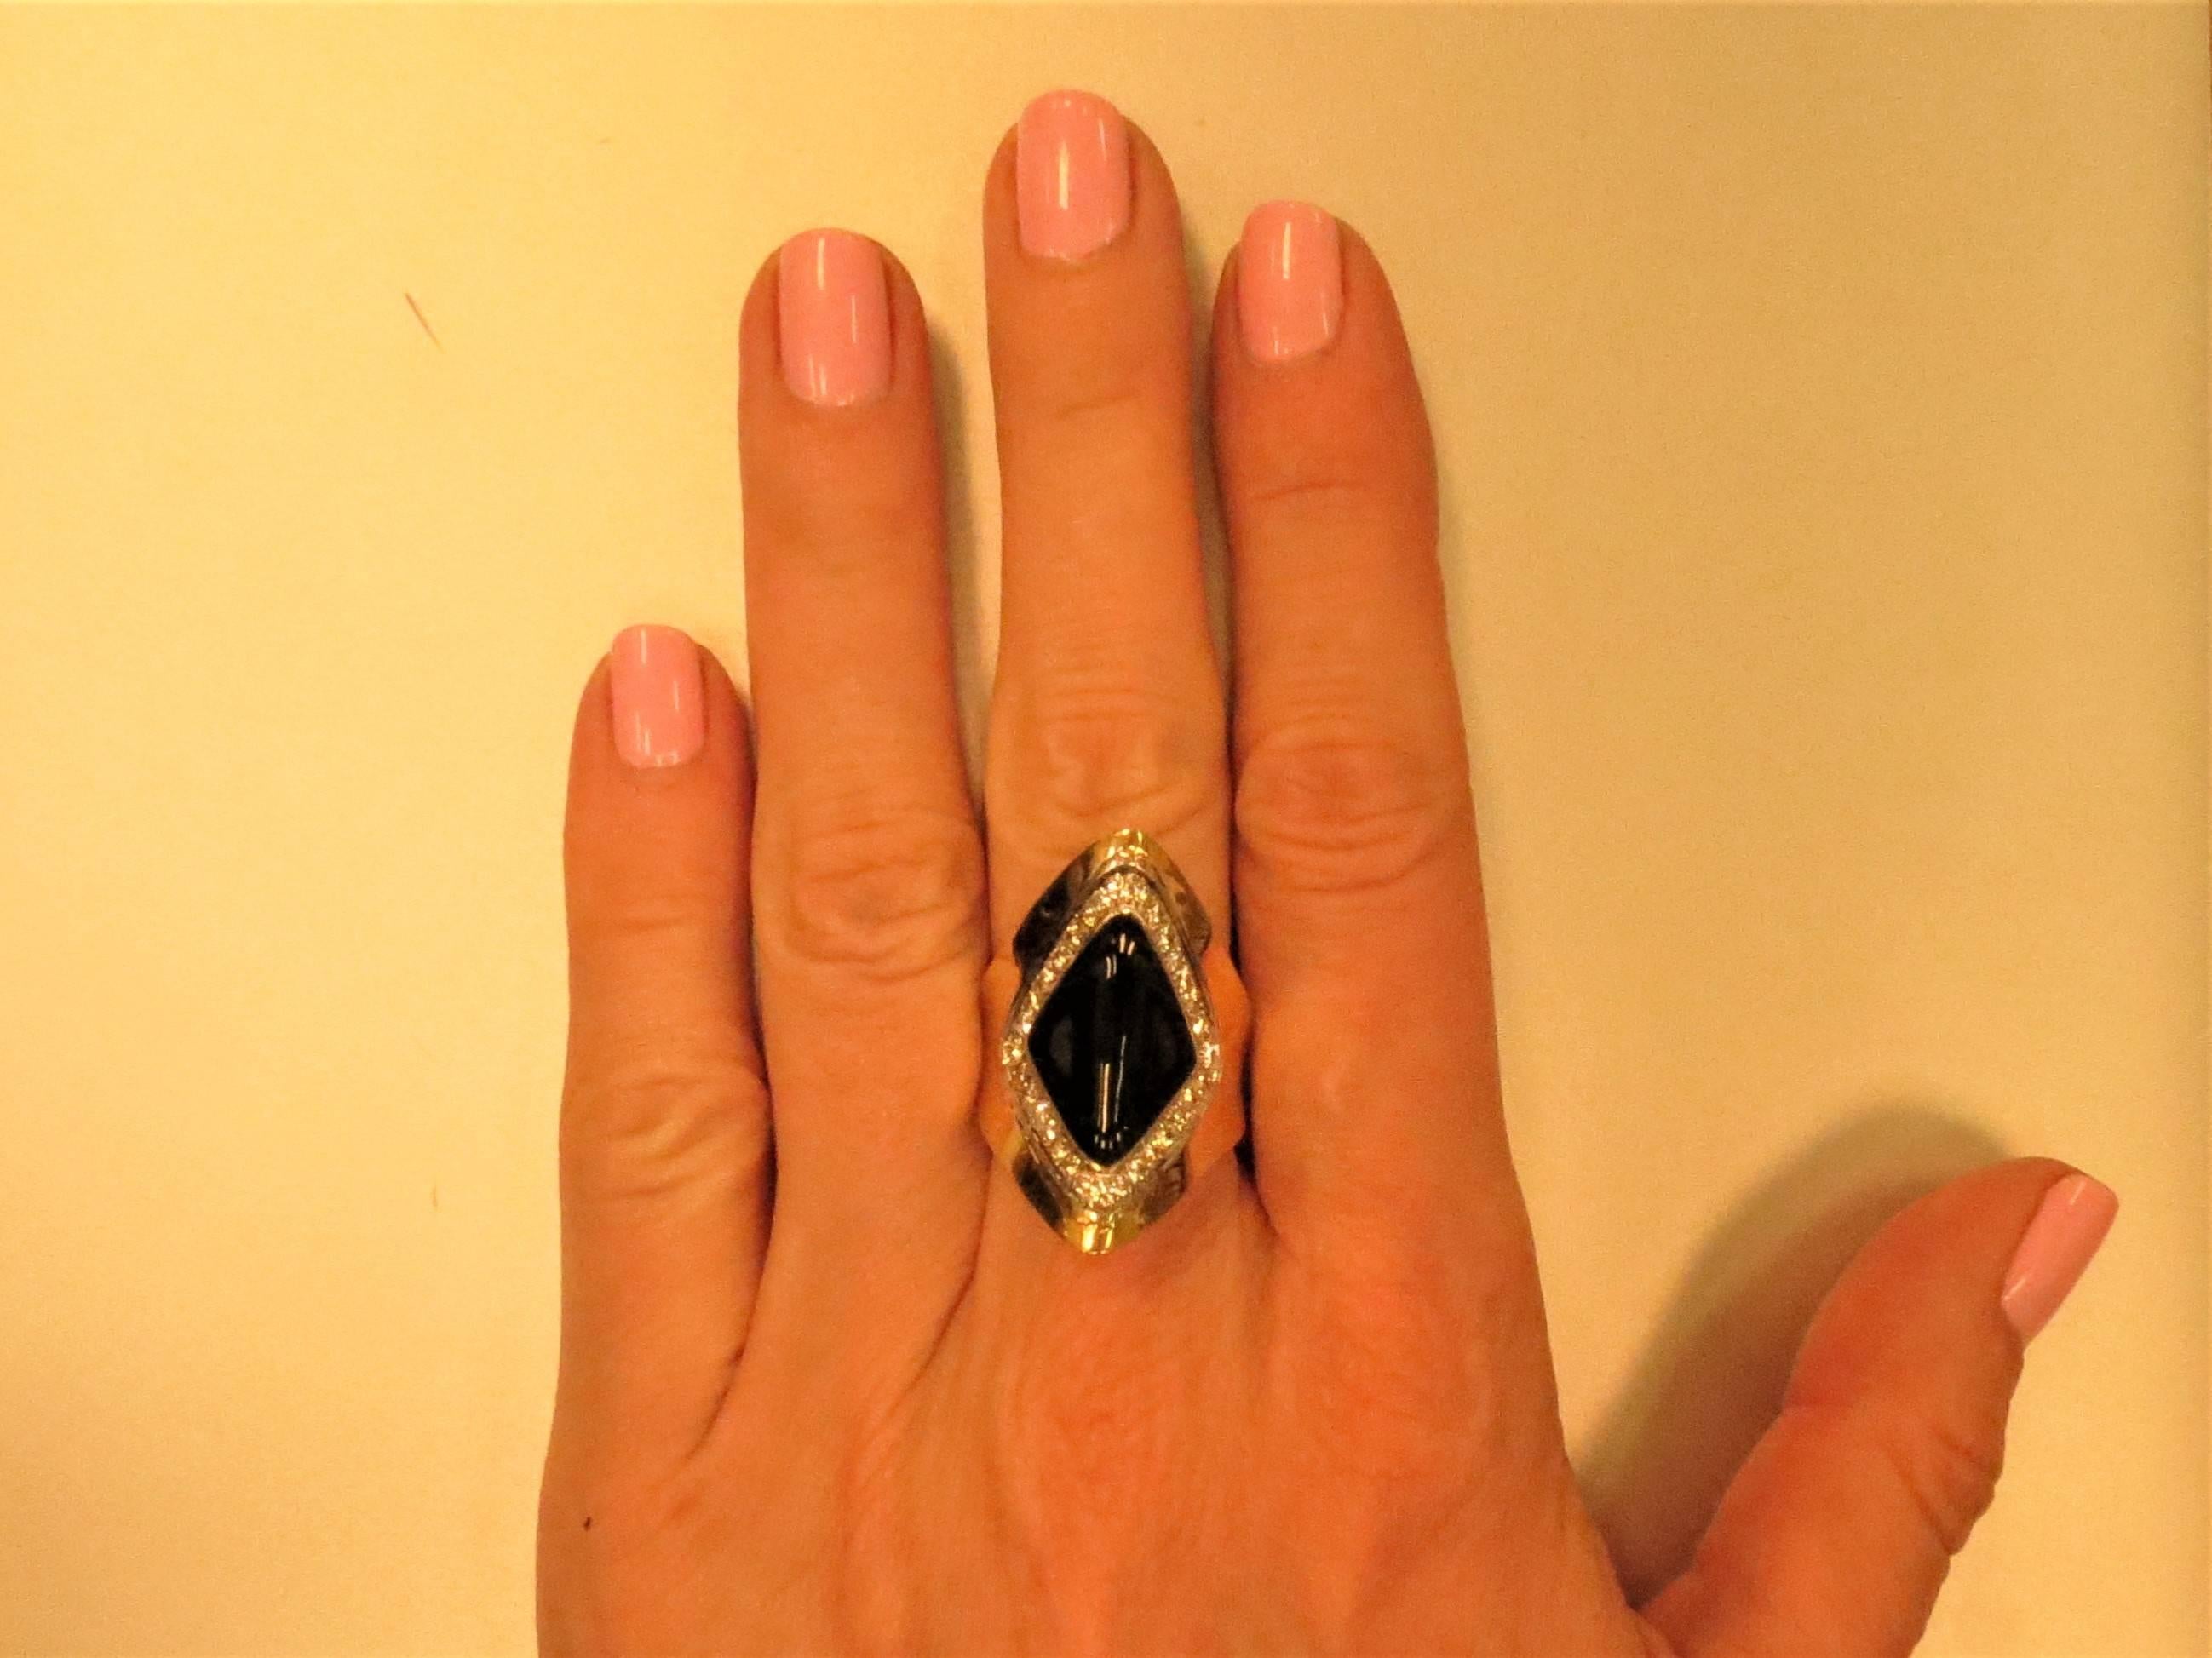 18K yellow gold black onyx ring set with 24 full cut round diamonds weighing .50cts, VS-SI clarity.
Finger size 6. May be sized.